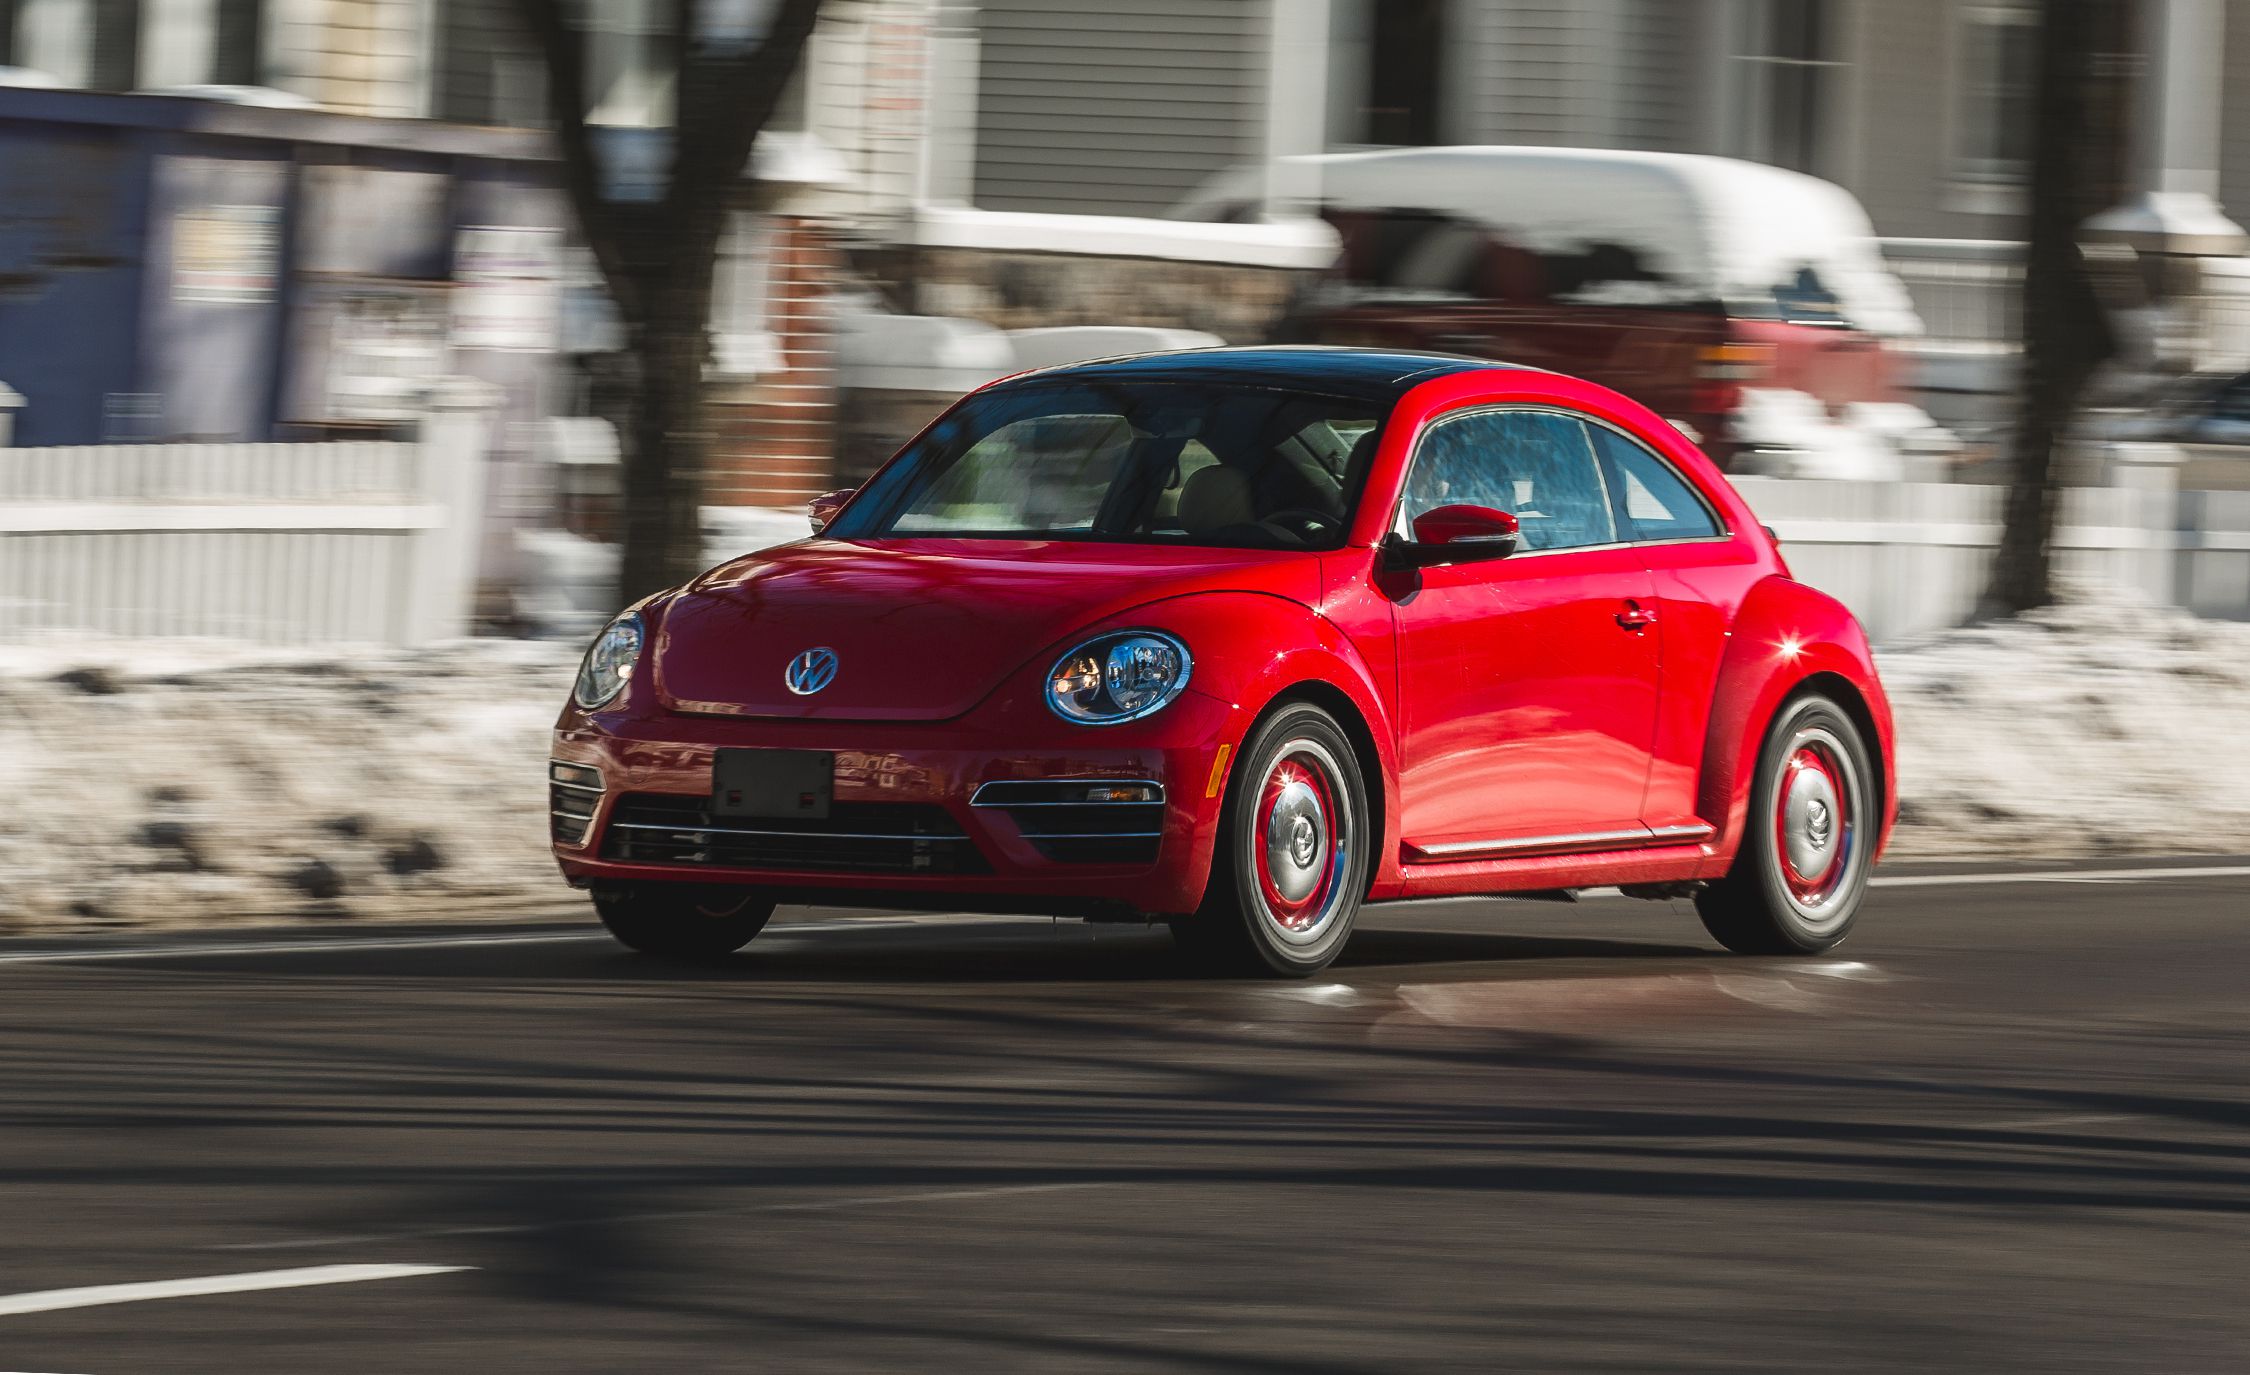 2018 Volkswagen Beetle Test | Review | Car and Driver